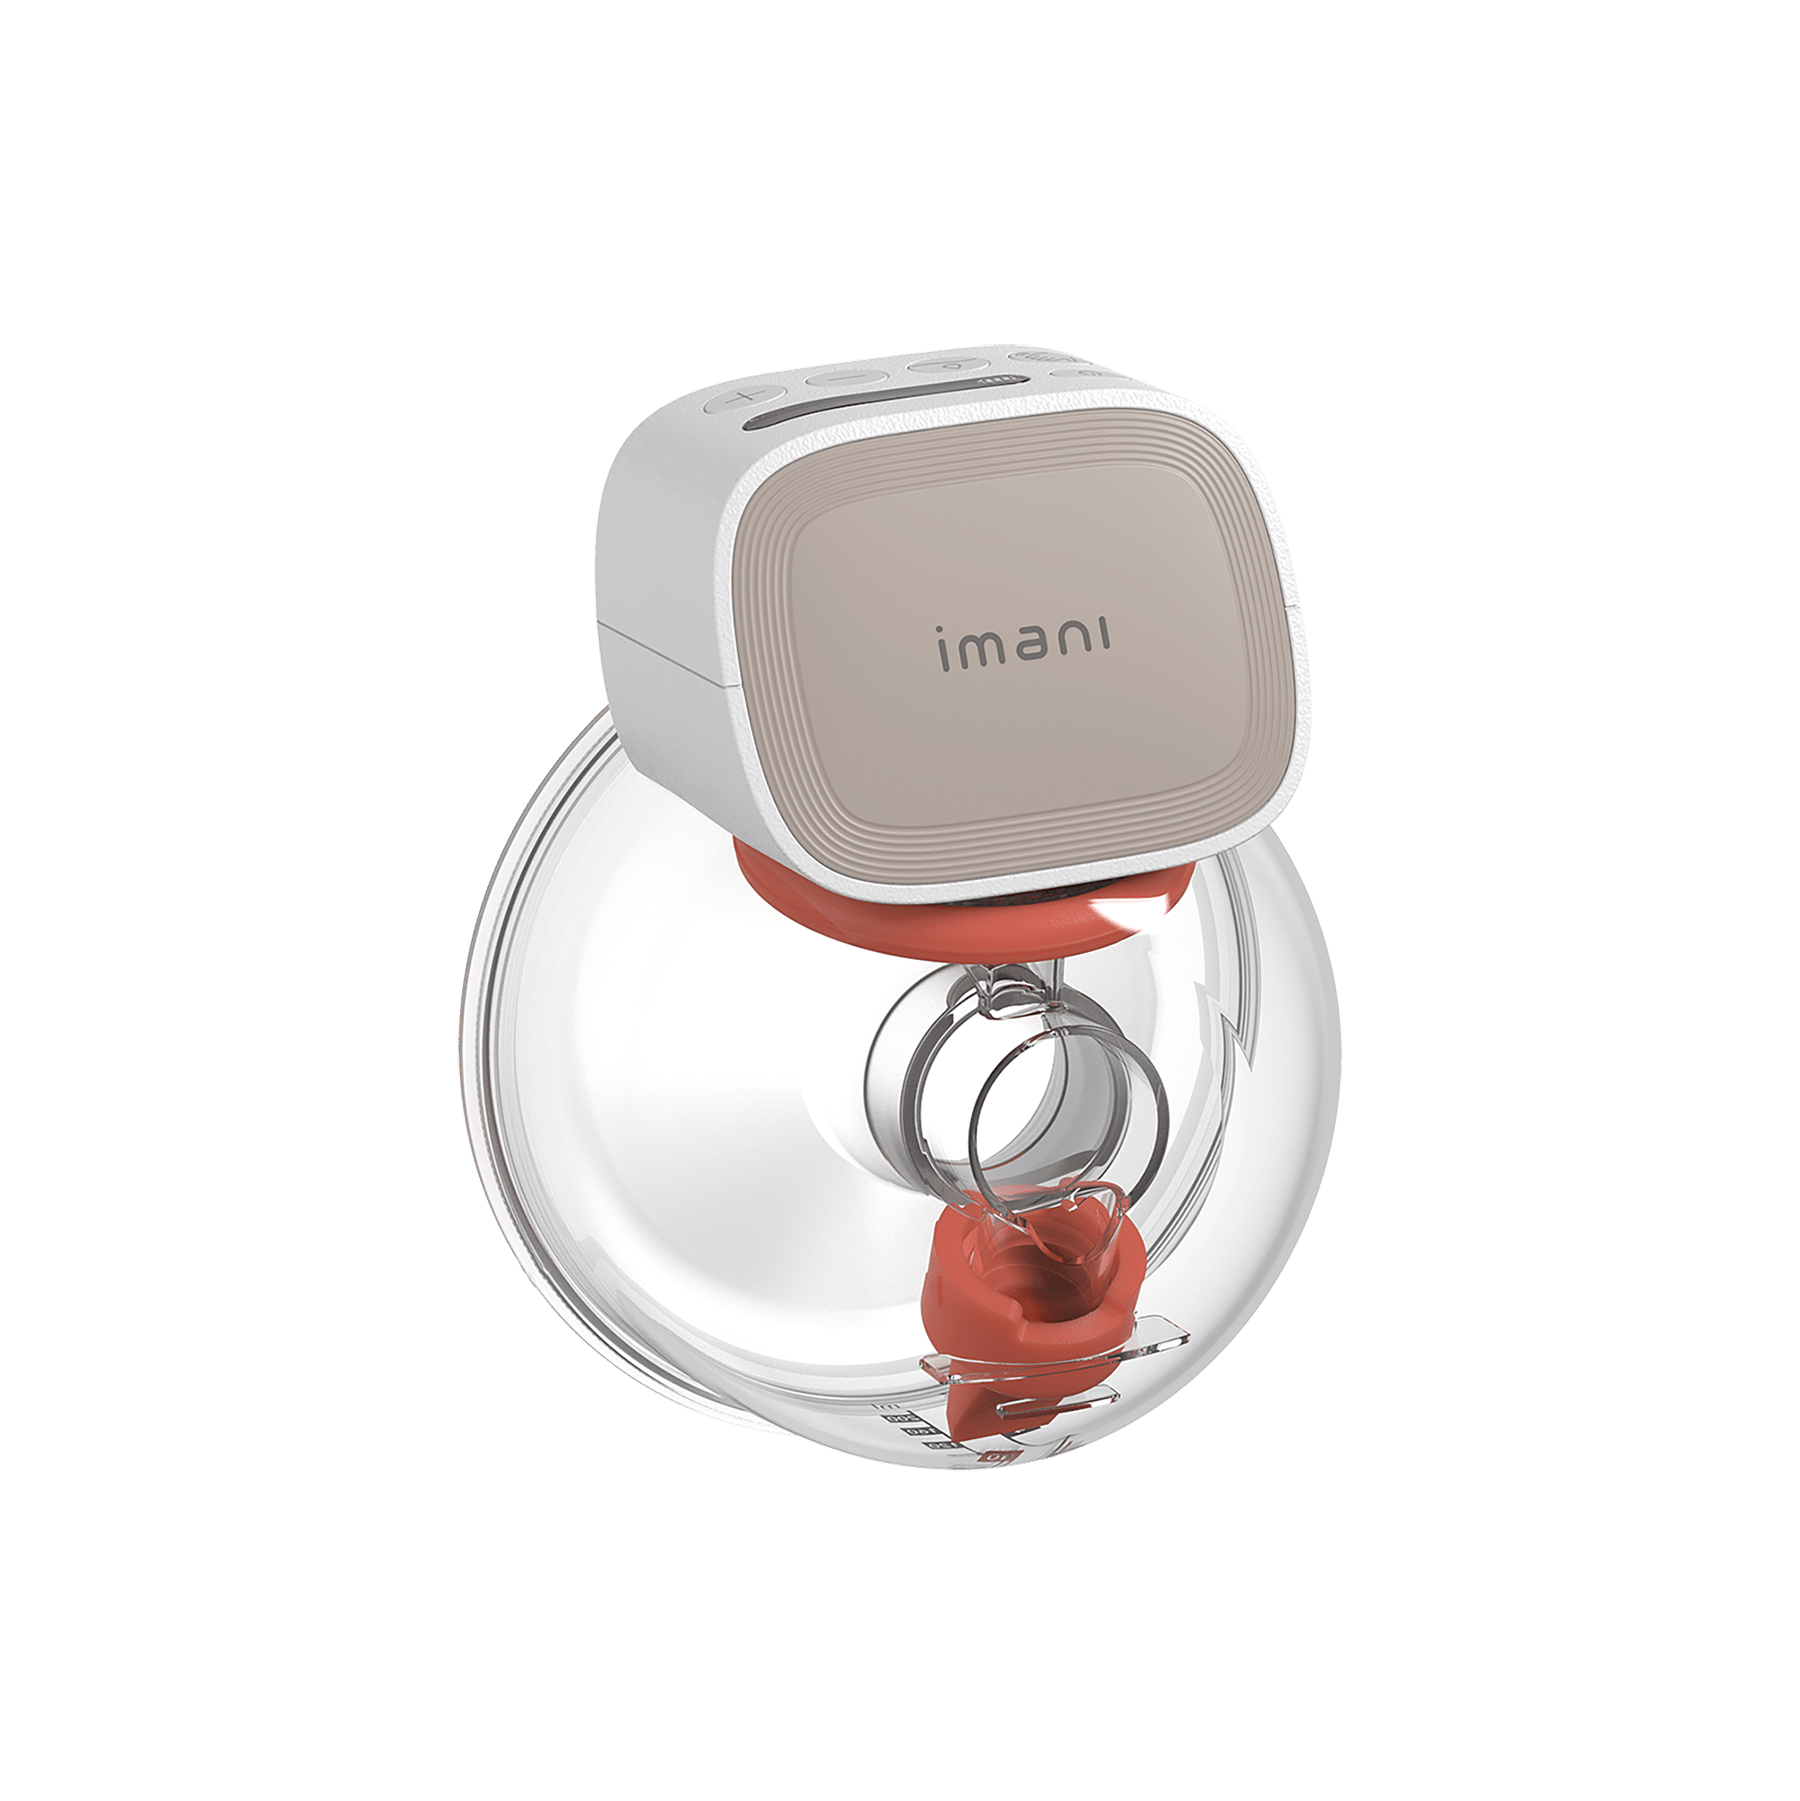 Spectra SG Mini Portable Hands Free Electric Breast Pump